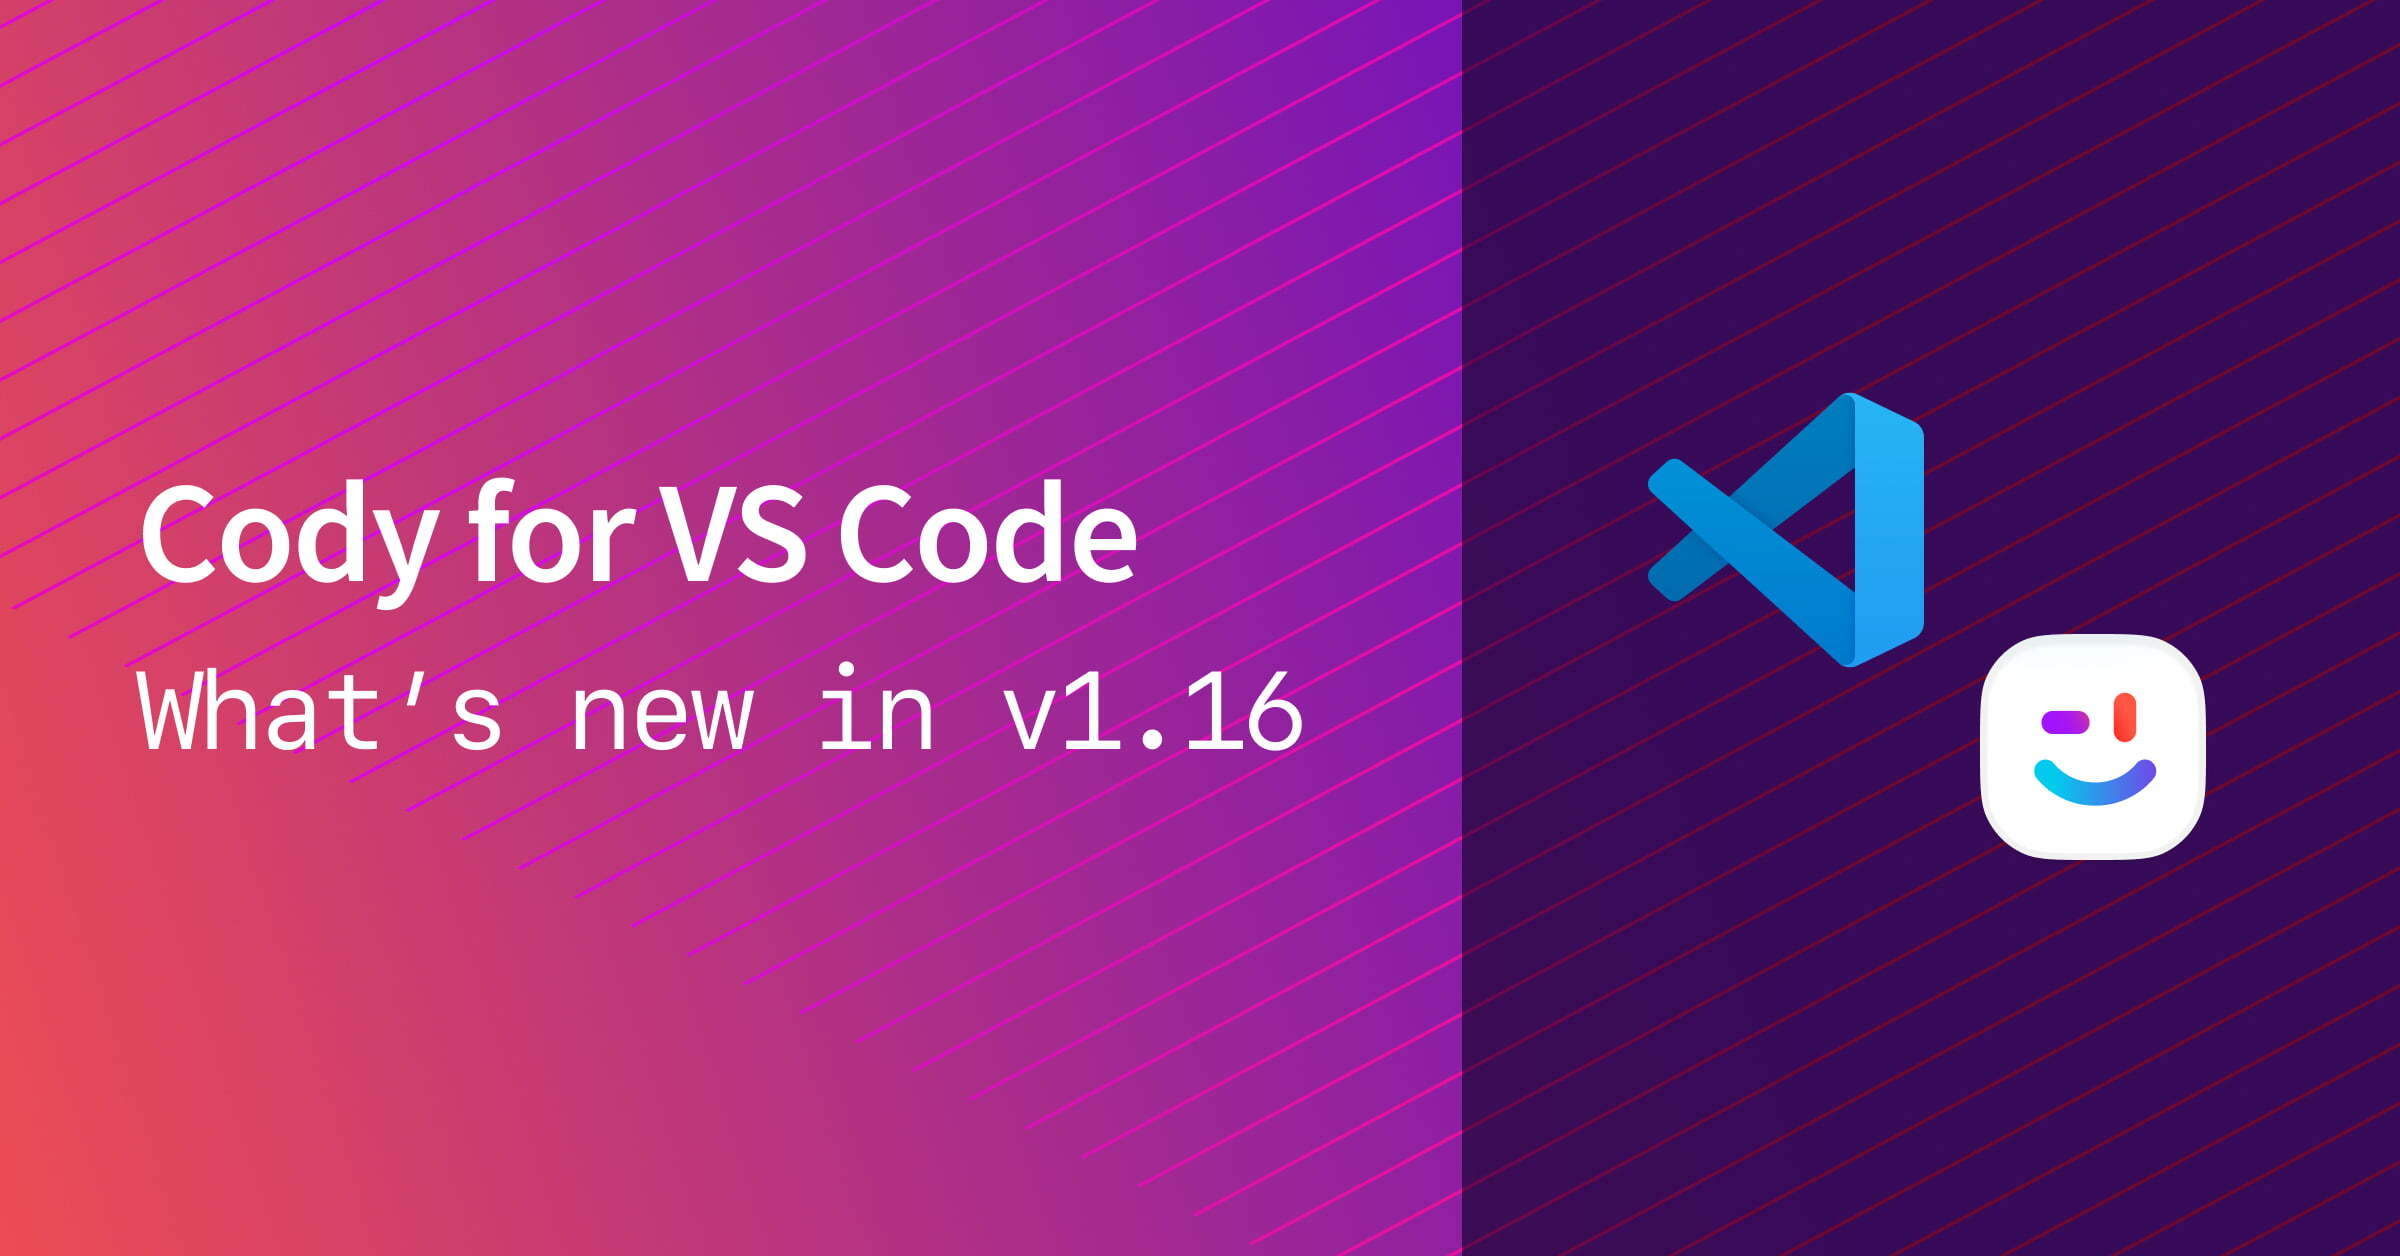 Cody for VS Code v1.16: More powerful custom commands plus Claude 3 models as the new default